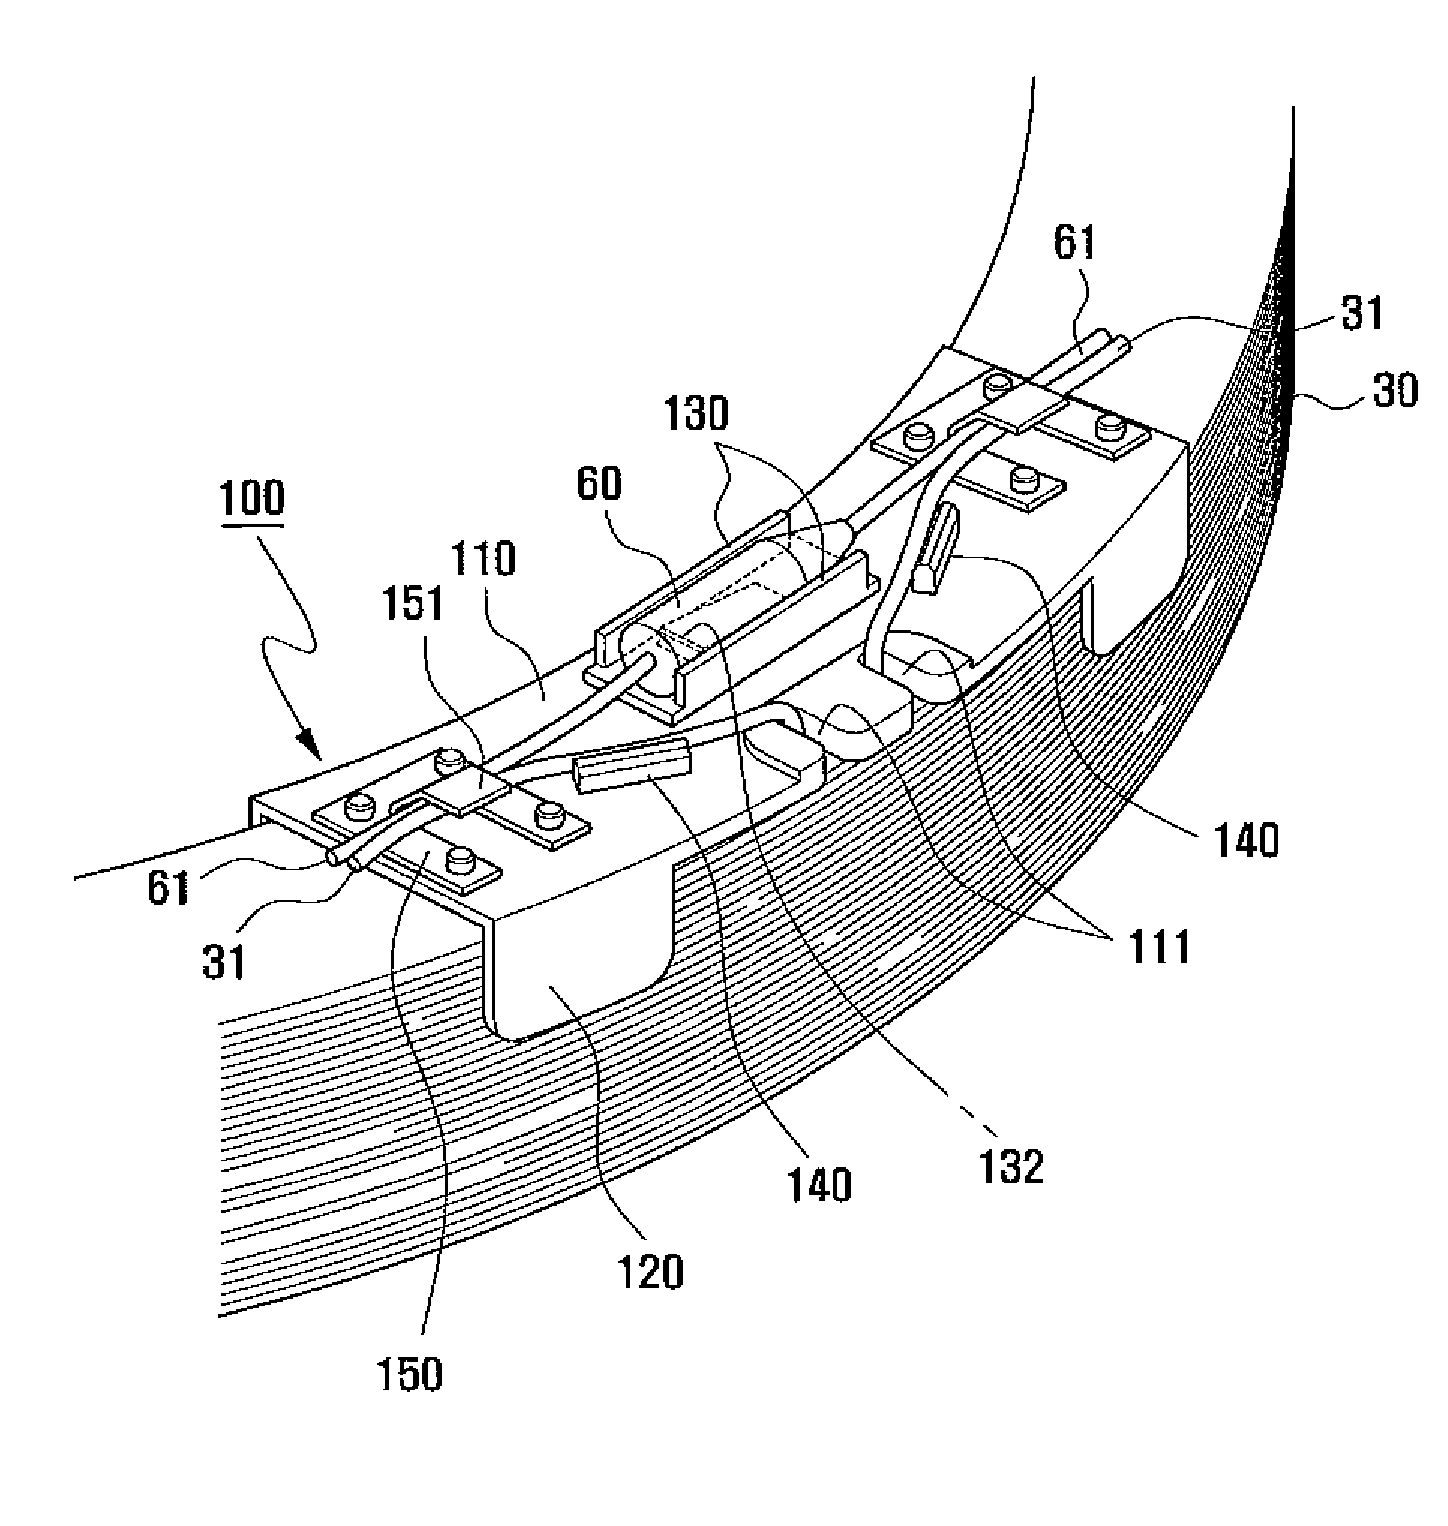 Field coil assembly for electromagnetic clutch